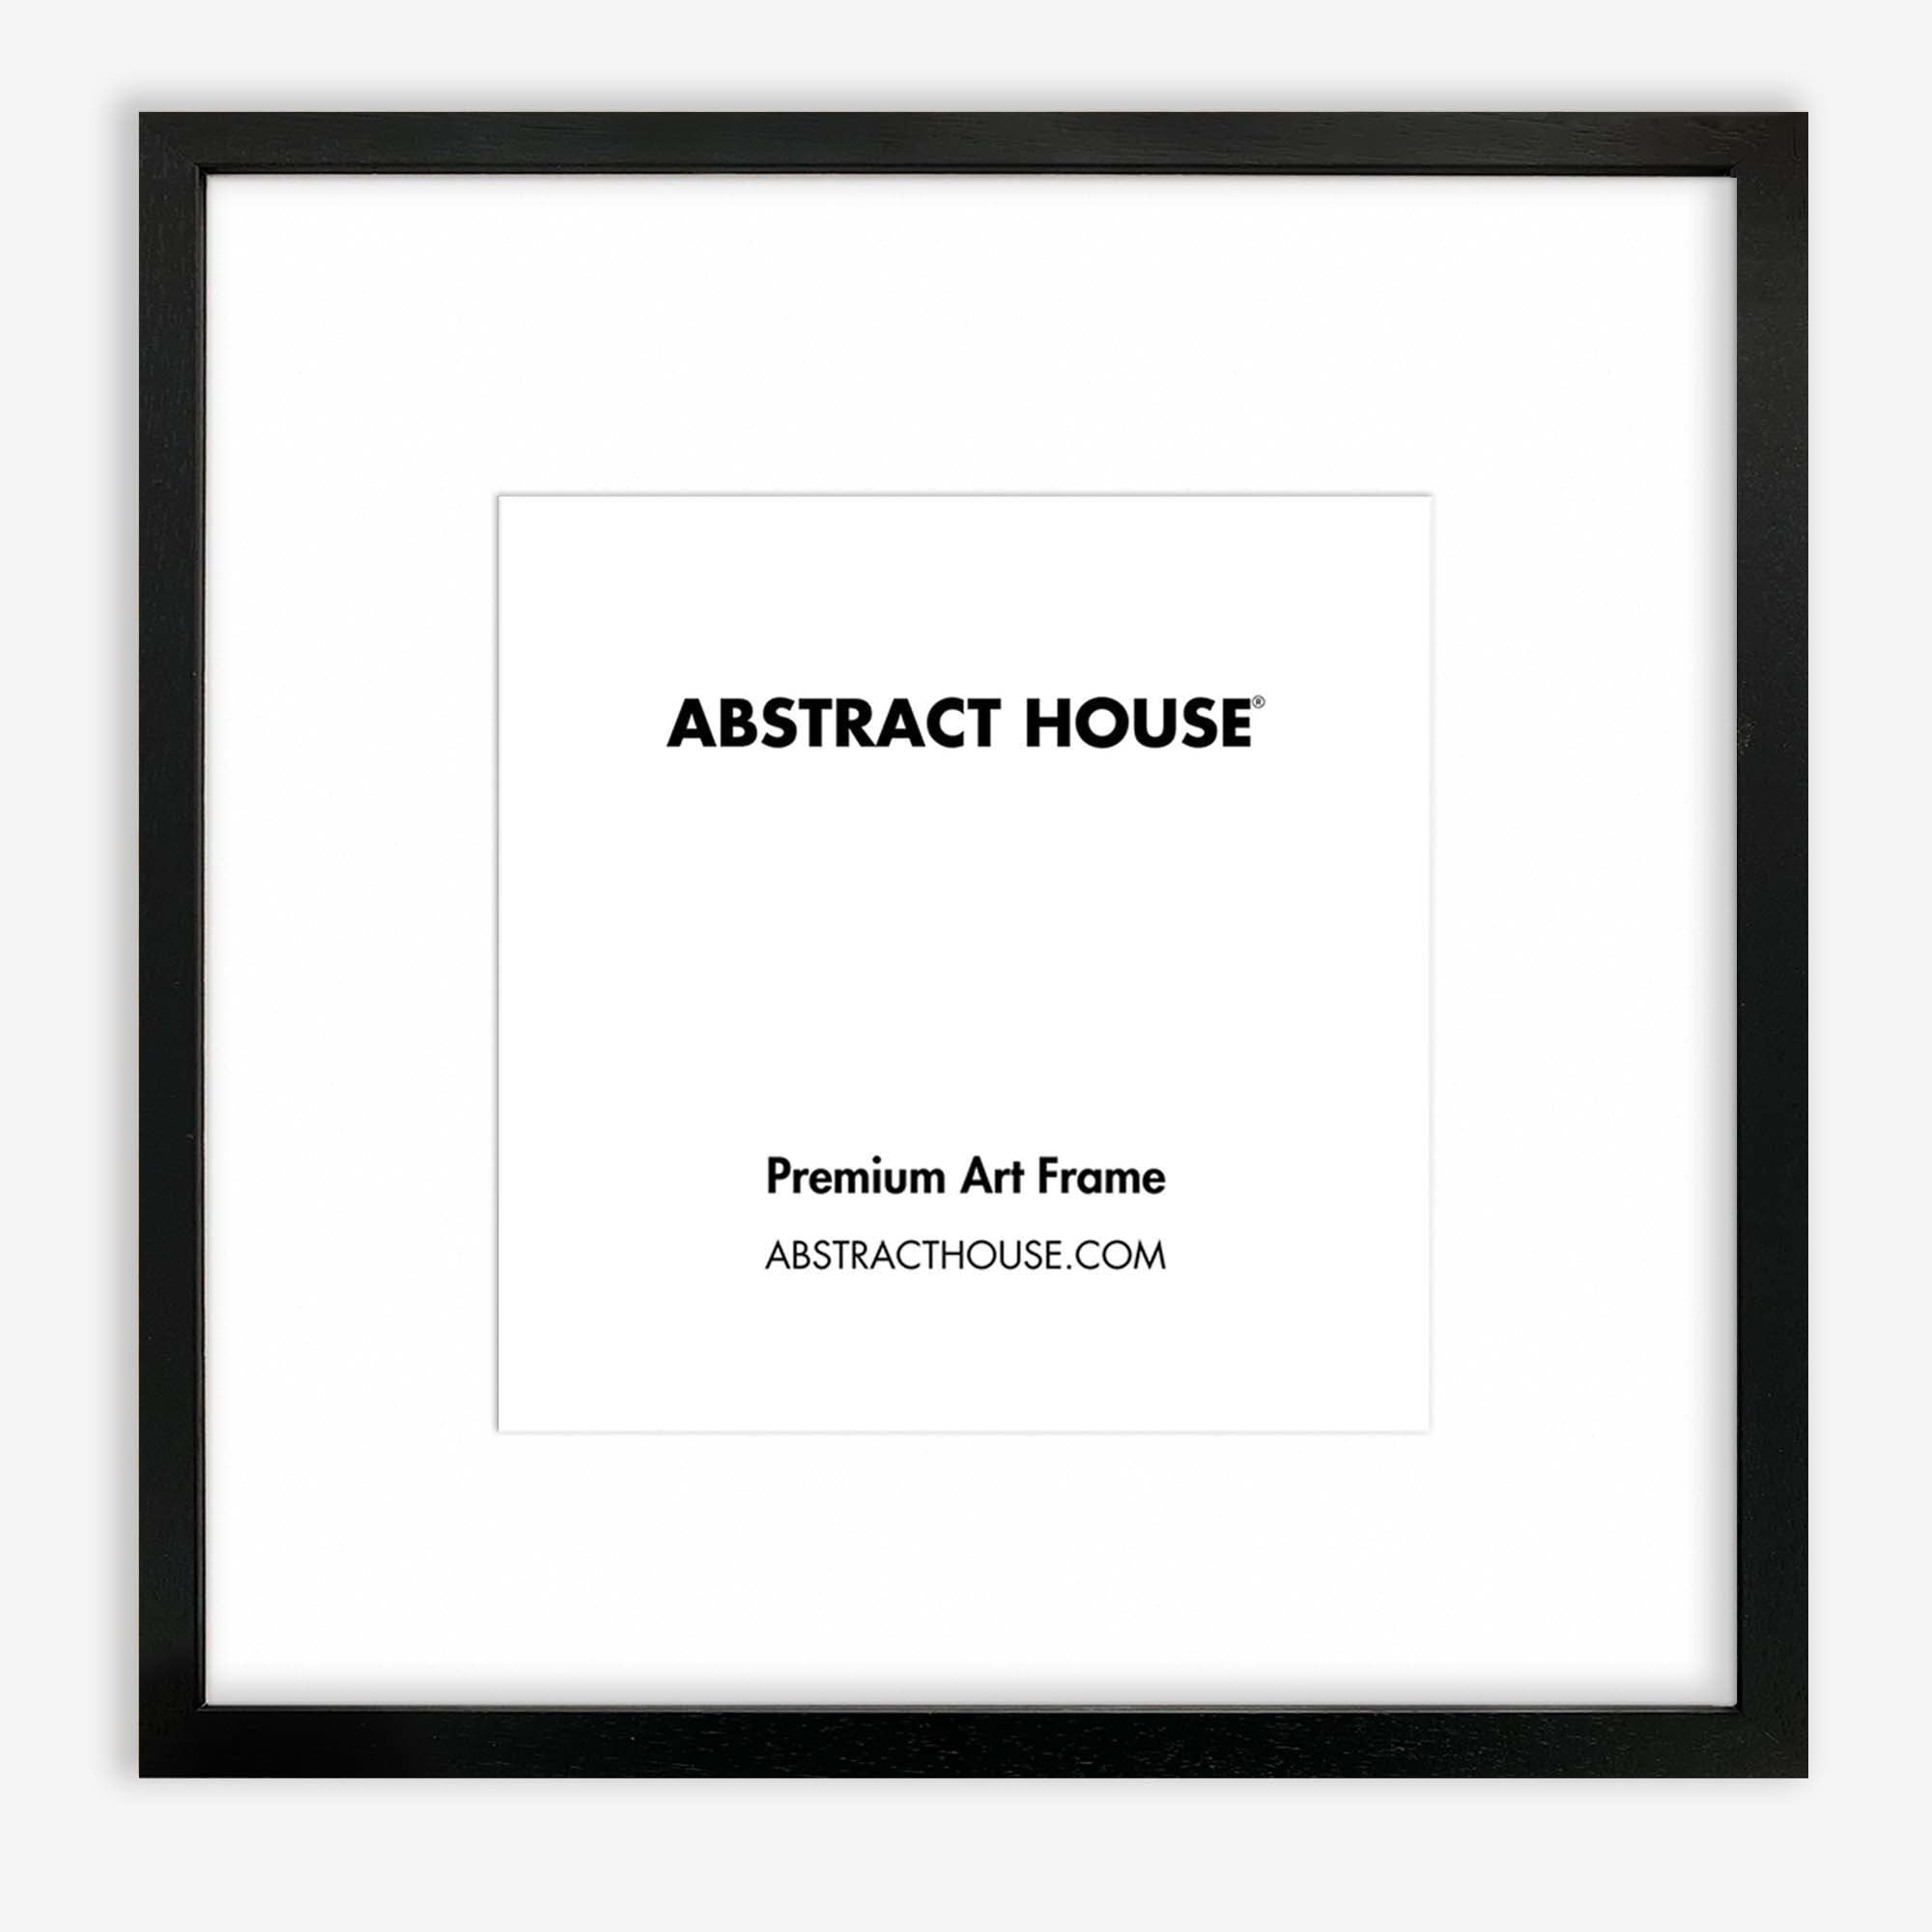 50x50 cm Wooden Frame-Black-30 x 30 cm / 11.8 x 11.8 Inches-Abstract House